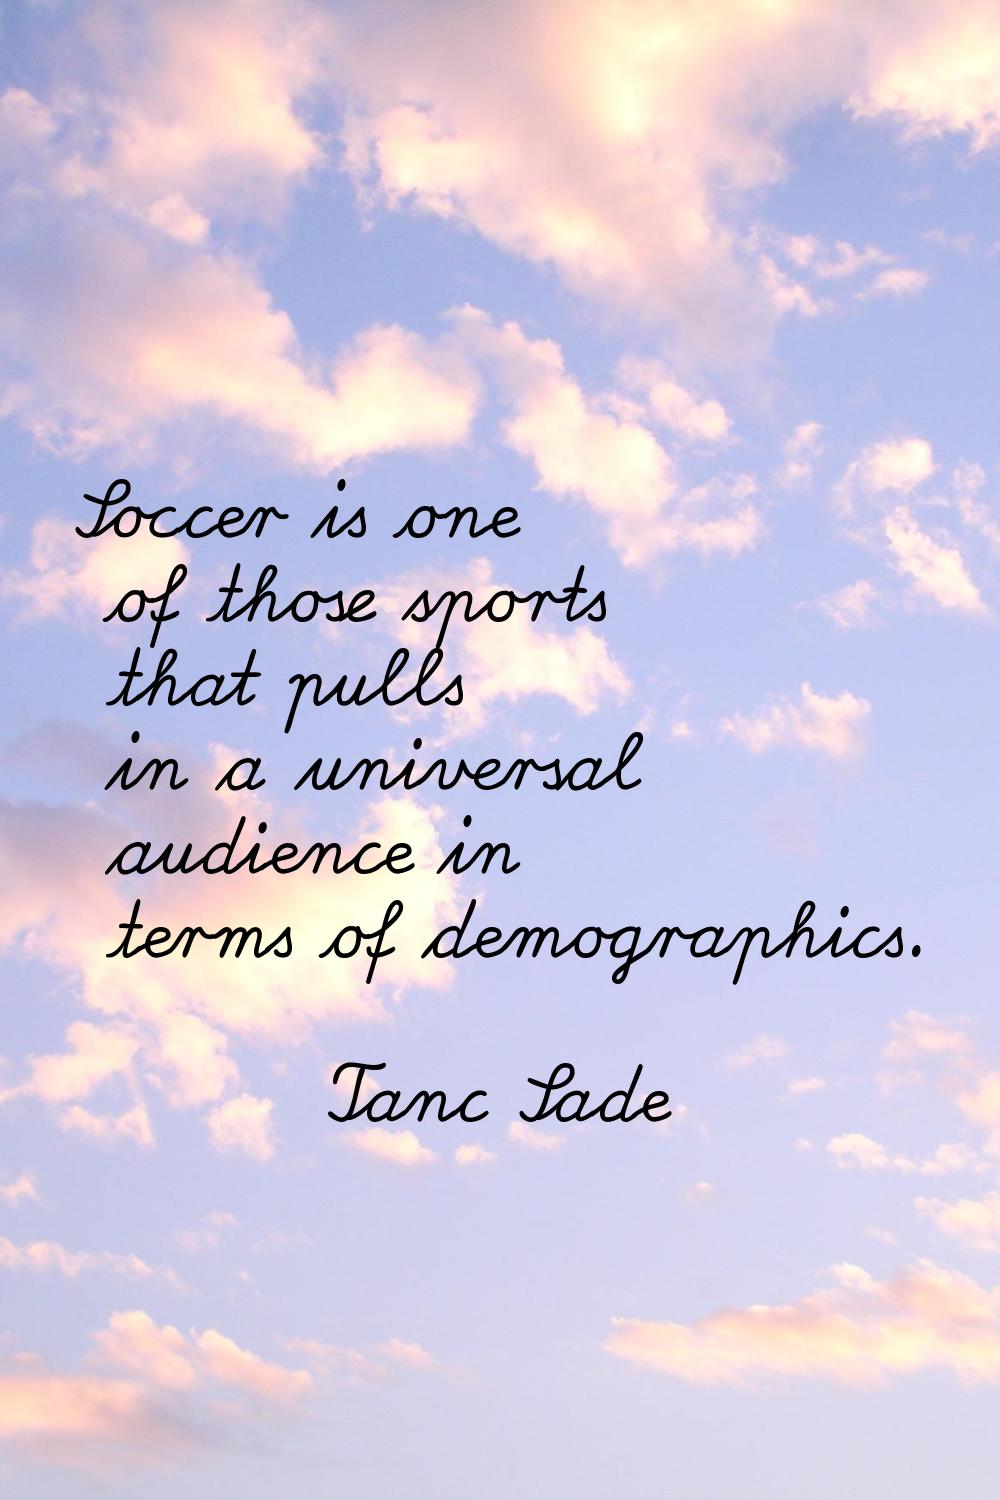 Soccer is one of those sports that pulls in a universal audience in terms of demographics.